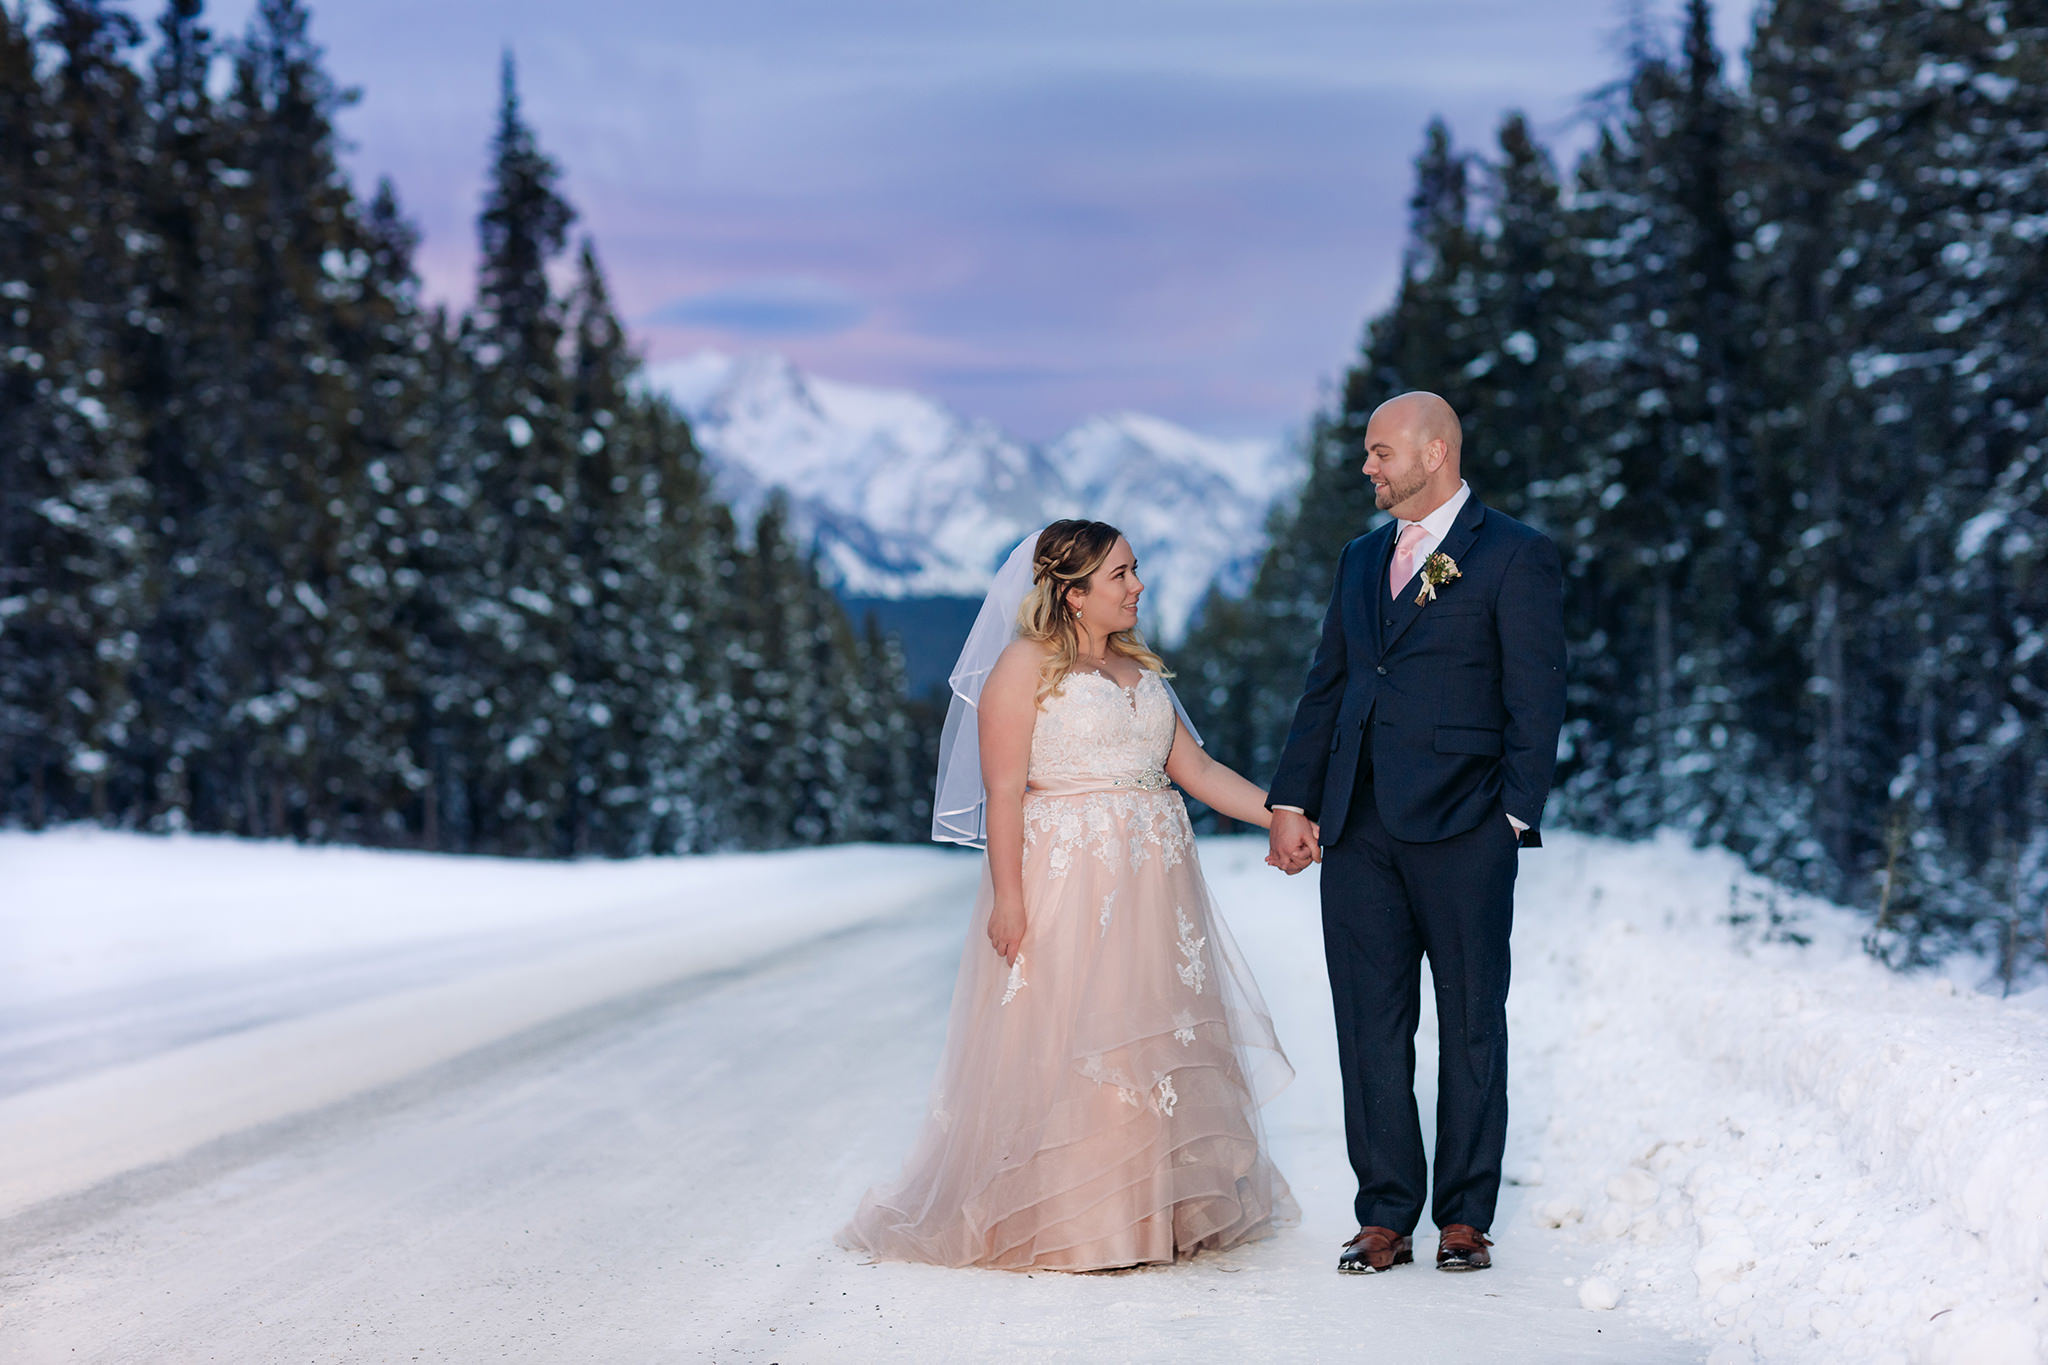 Lake Louise winter elopement on frozen Lake Louise with Bride in pink wedding dress in winter wonderland on the Bow Valley Parkway at sunset in Banff National Park photographed by ENV Photography